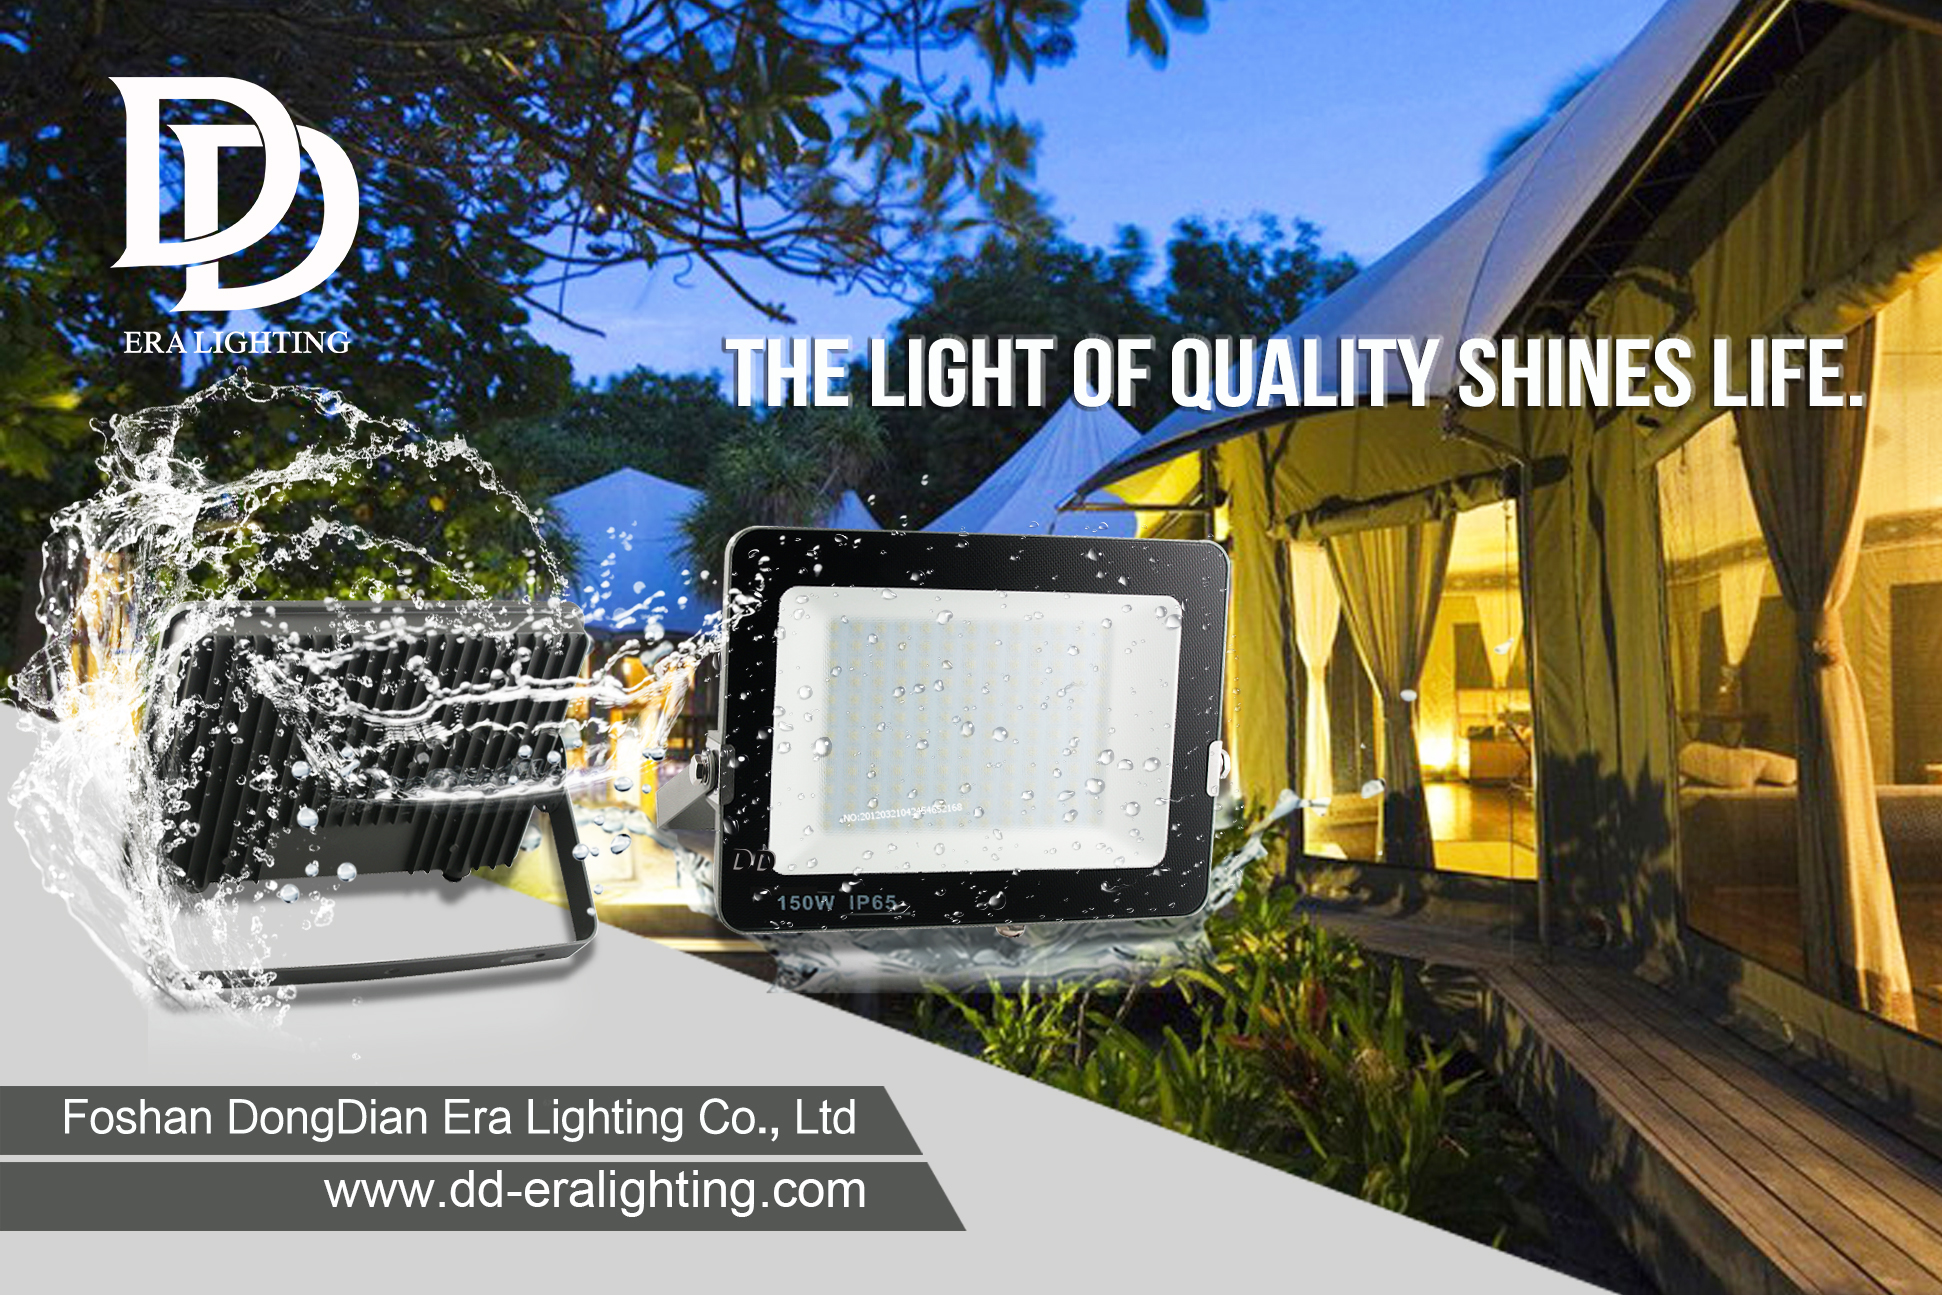 led-floodlights | Ring expands its smart lighting with solar and indoor bulbs